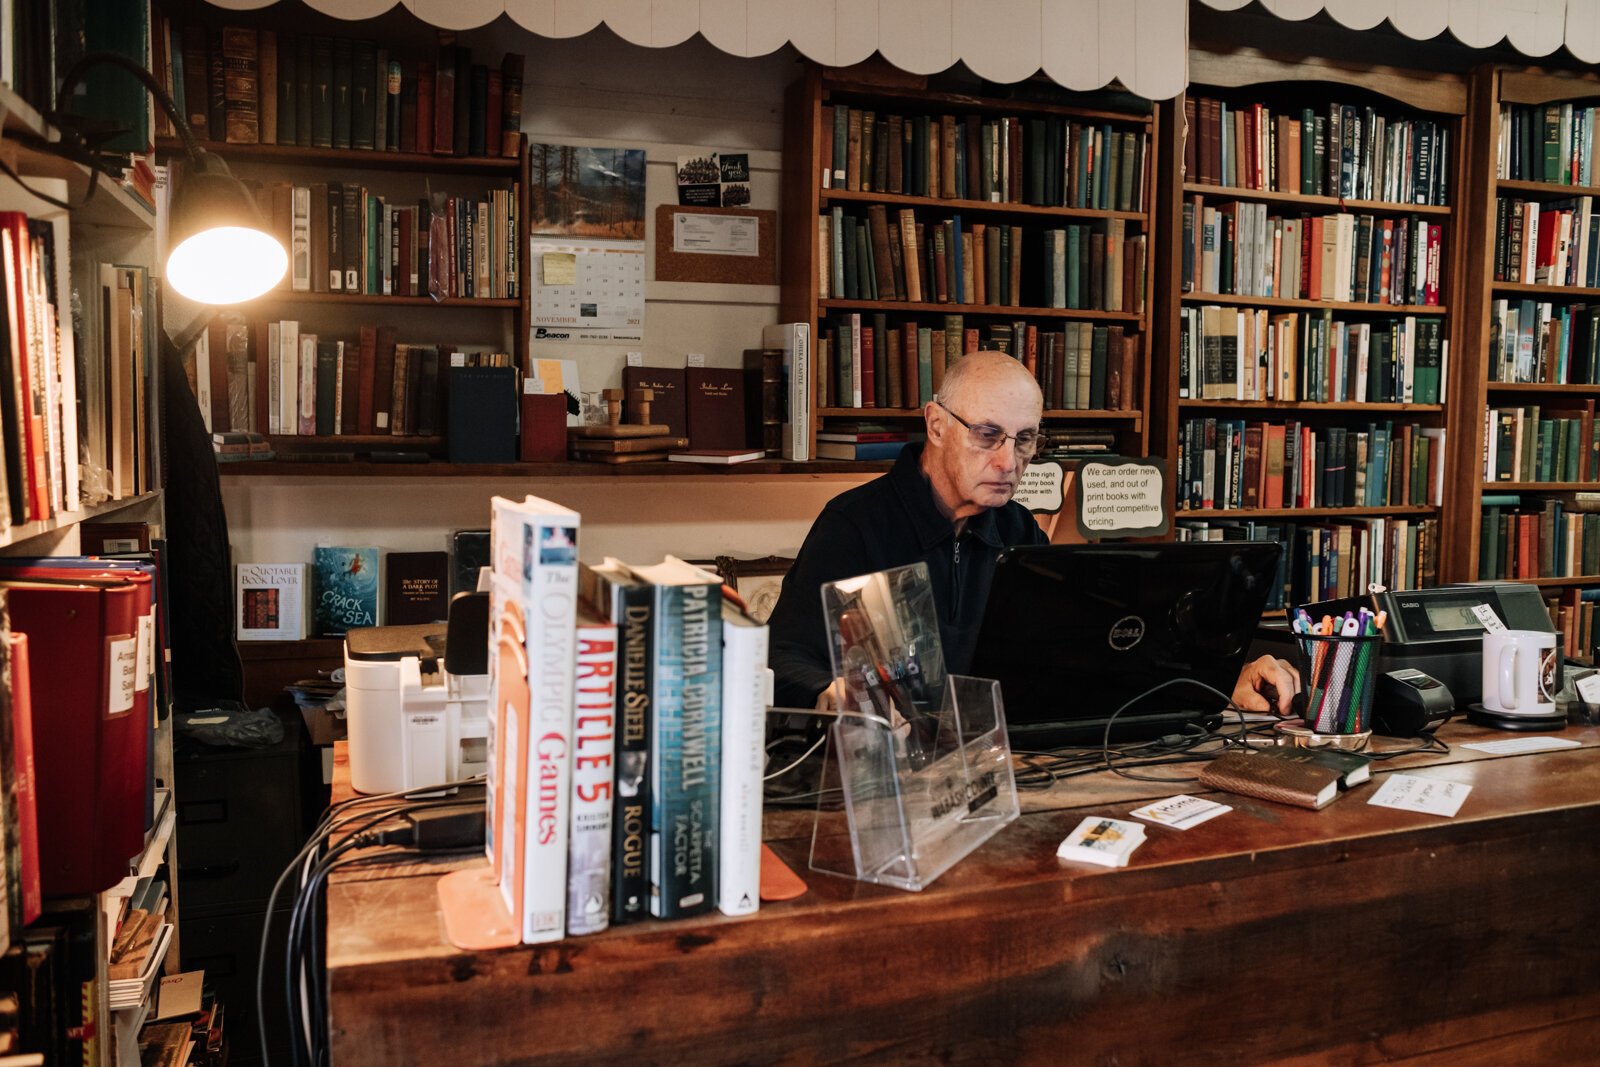 Manager Ray Daniels works the counter at Reading Room Books at 264 S. Wabash St. in Wabash.